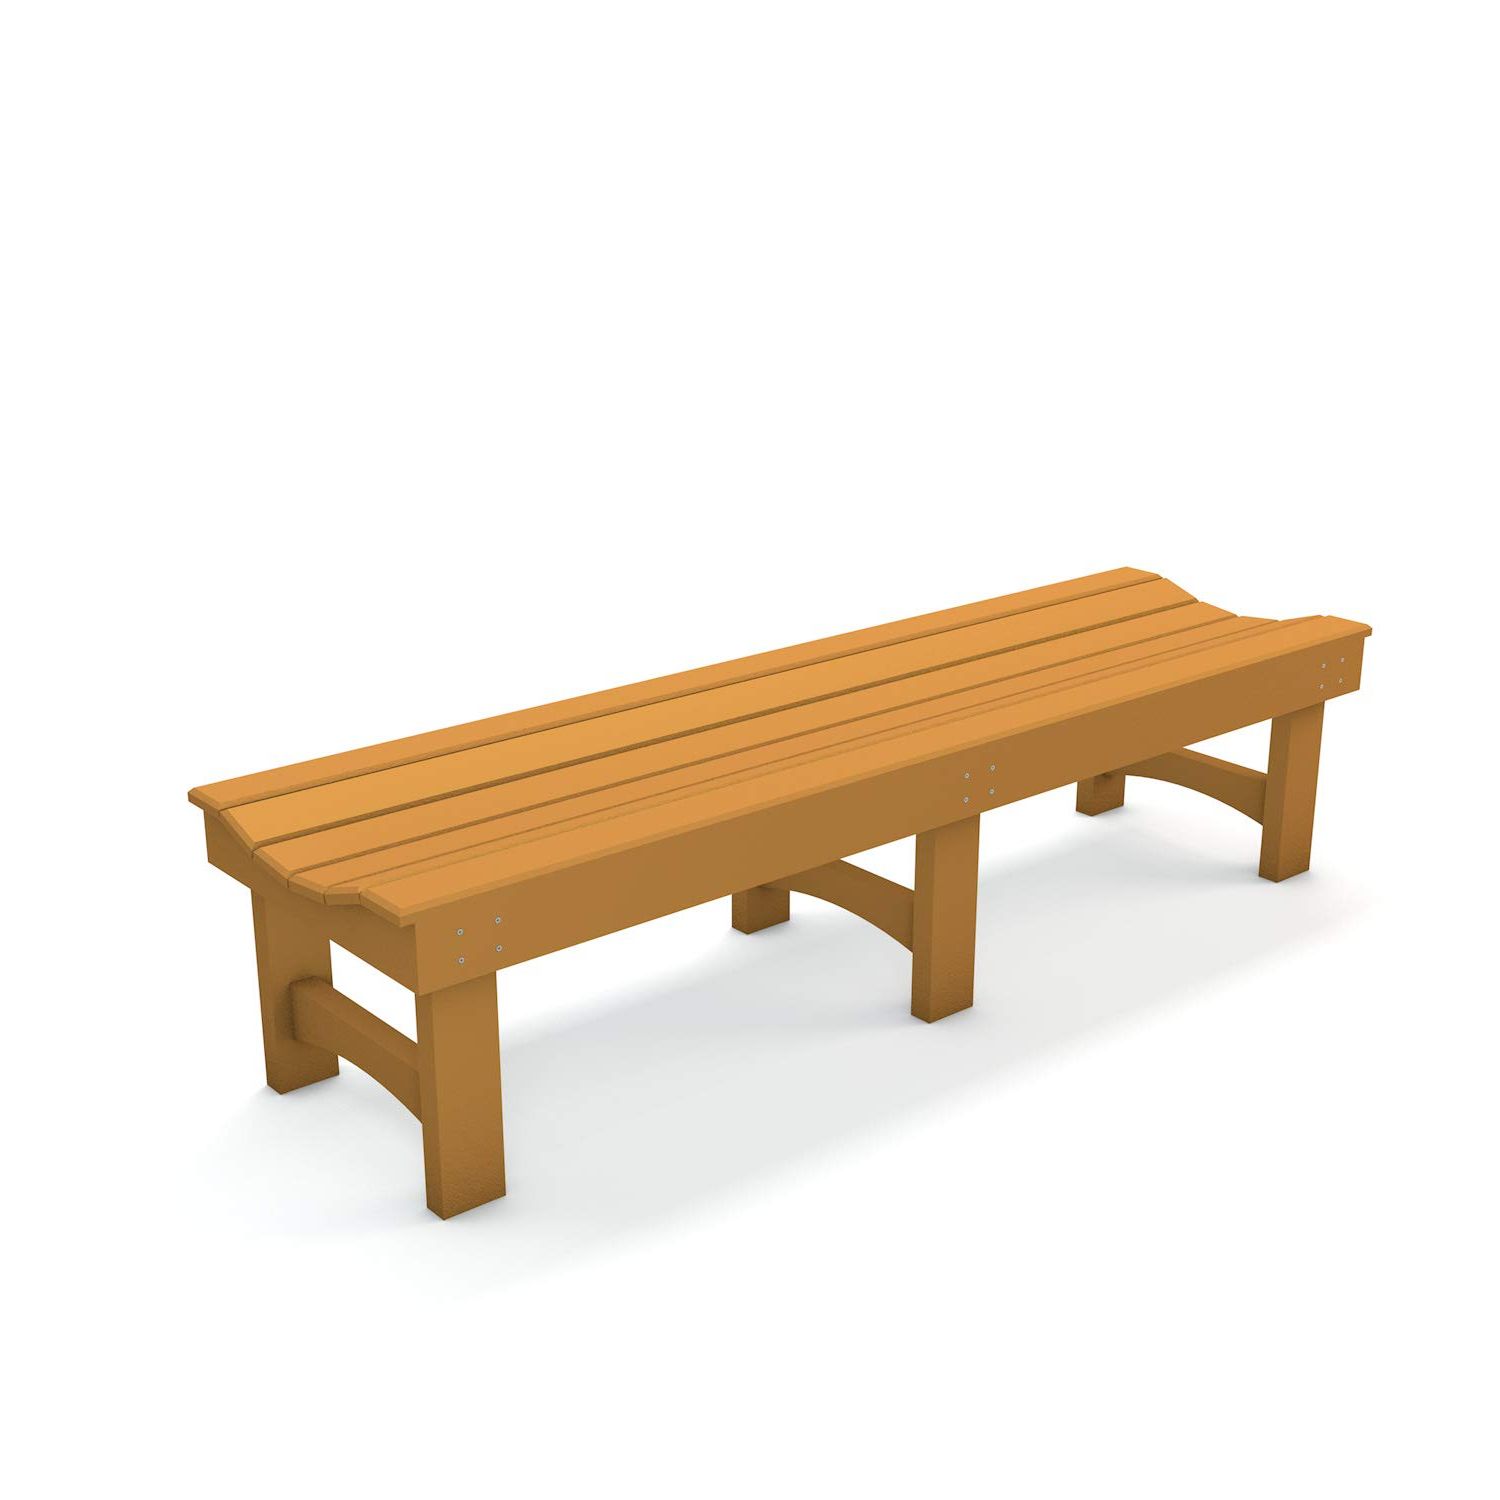 Amazon : Frog Furnishings Garden Bench, 6', Cedar Pertaining To 2020 Cedar Colonial Style Glider Benches (Photo 2 of 30)